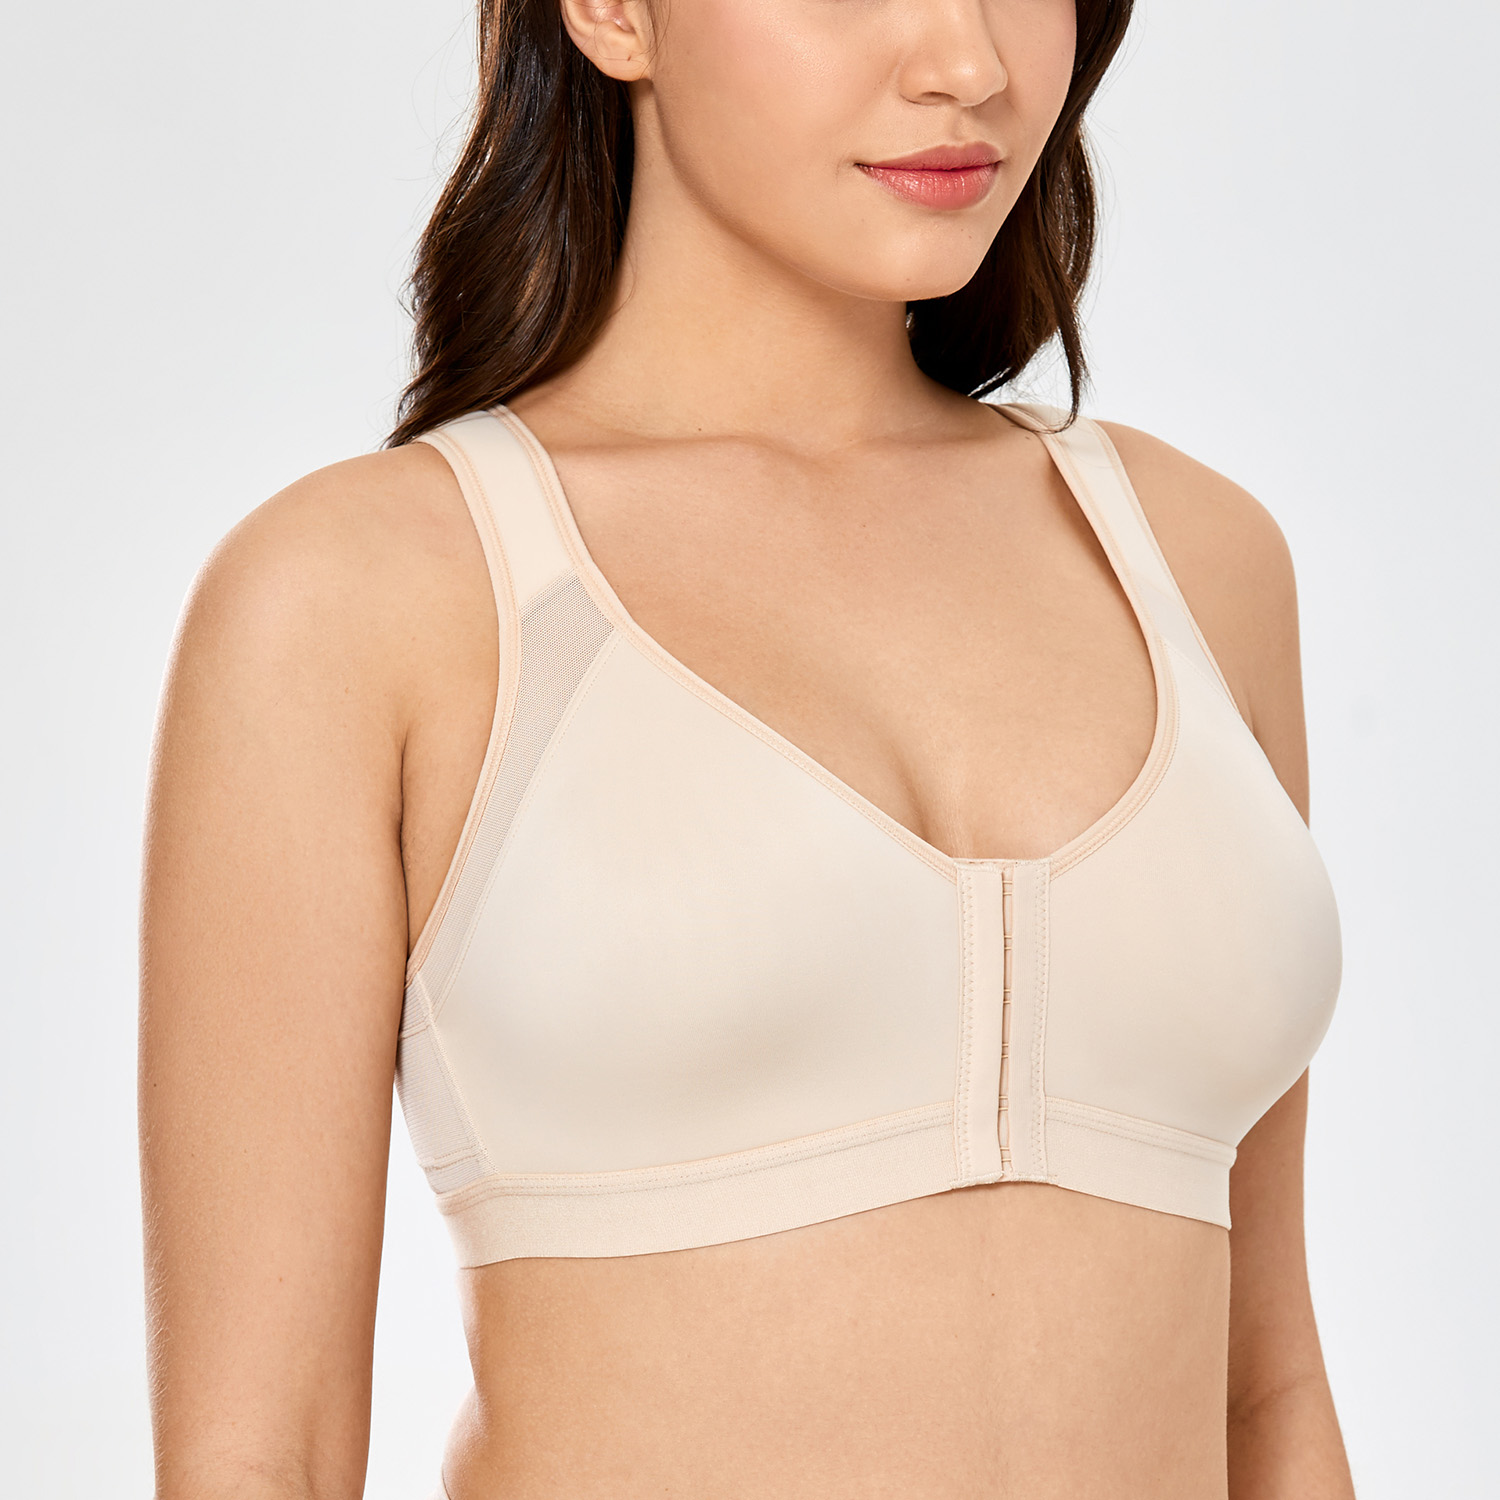  Women's Full Coverage Front Closure Wire Back Support